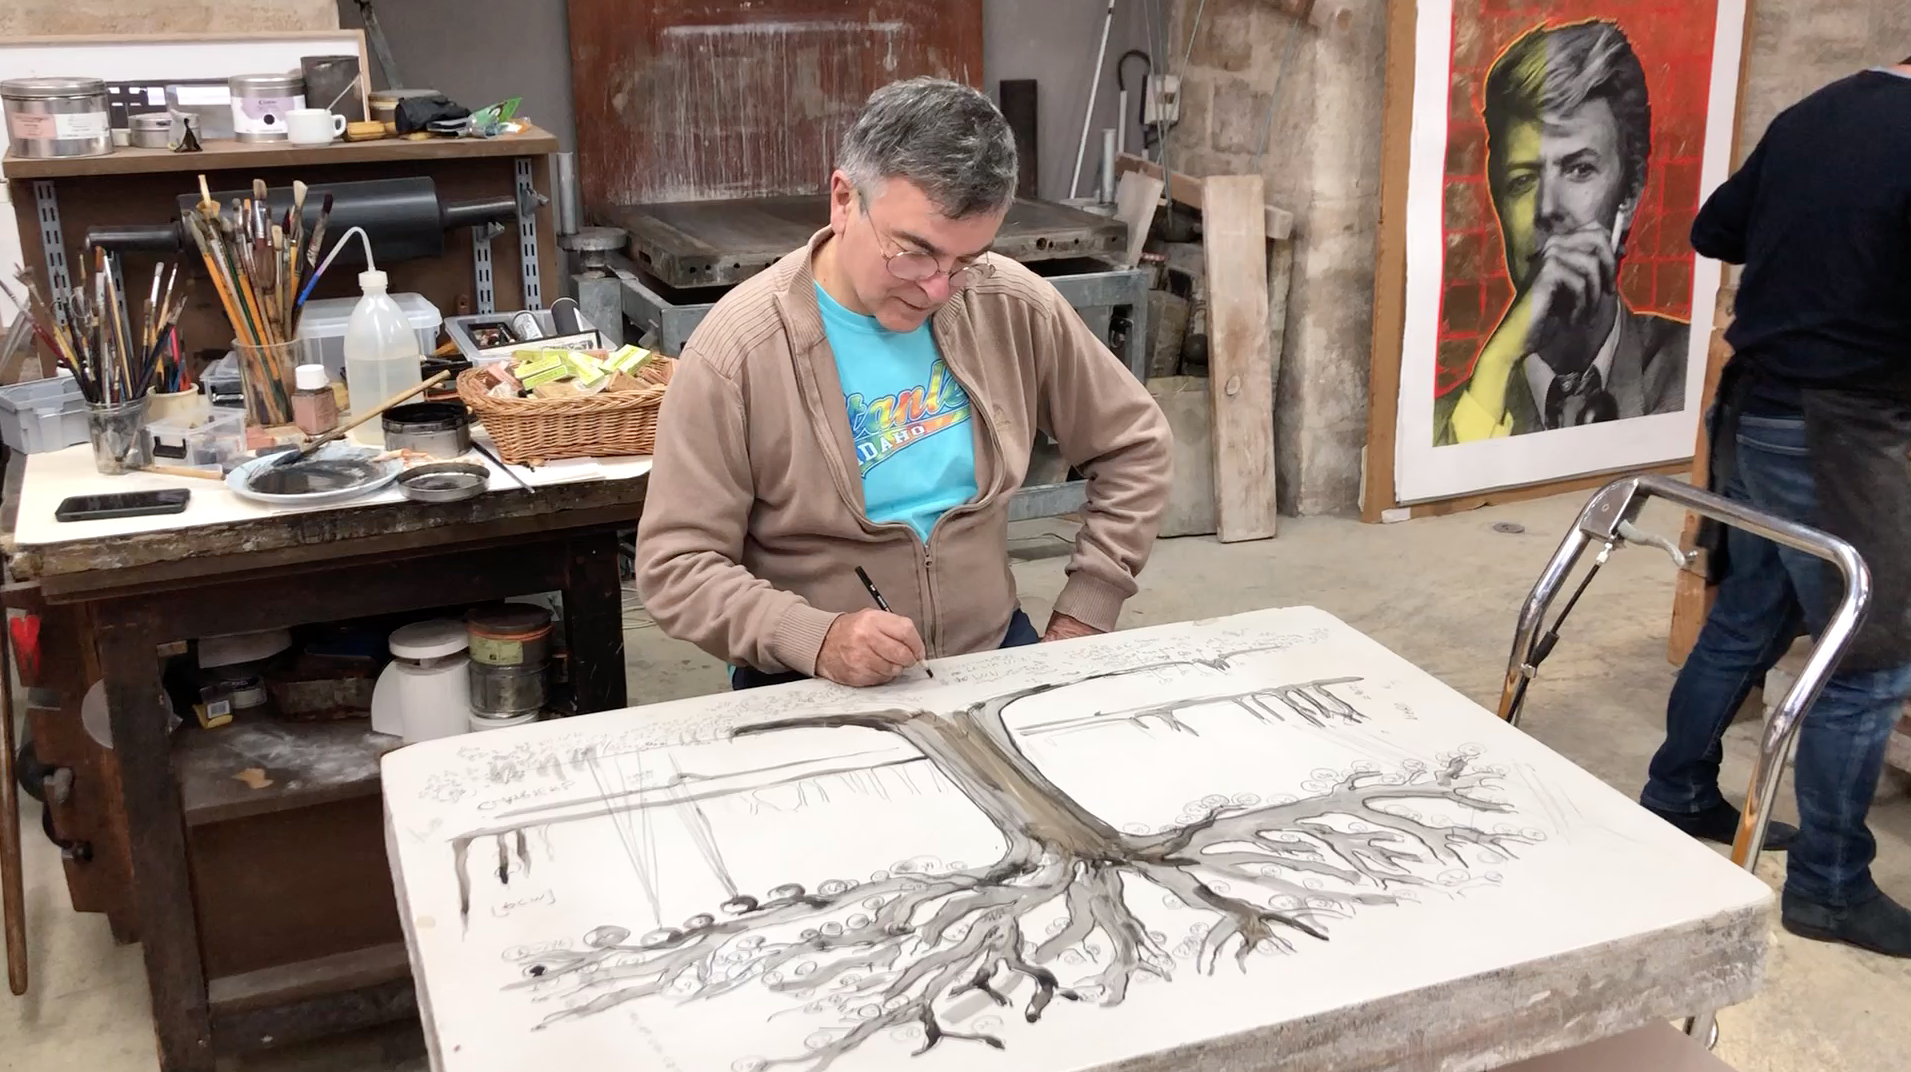 Video - 18 novembre 2019,  Fabrice Hyber commence sa lithographie 